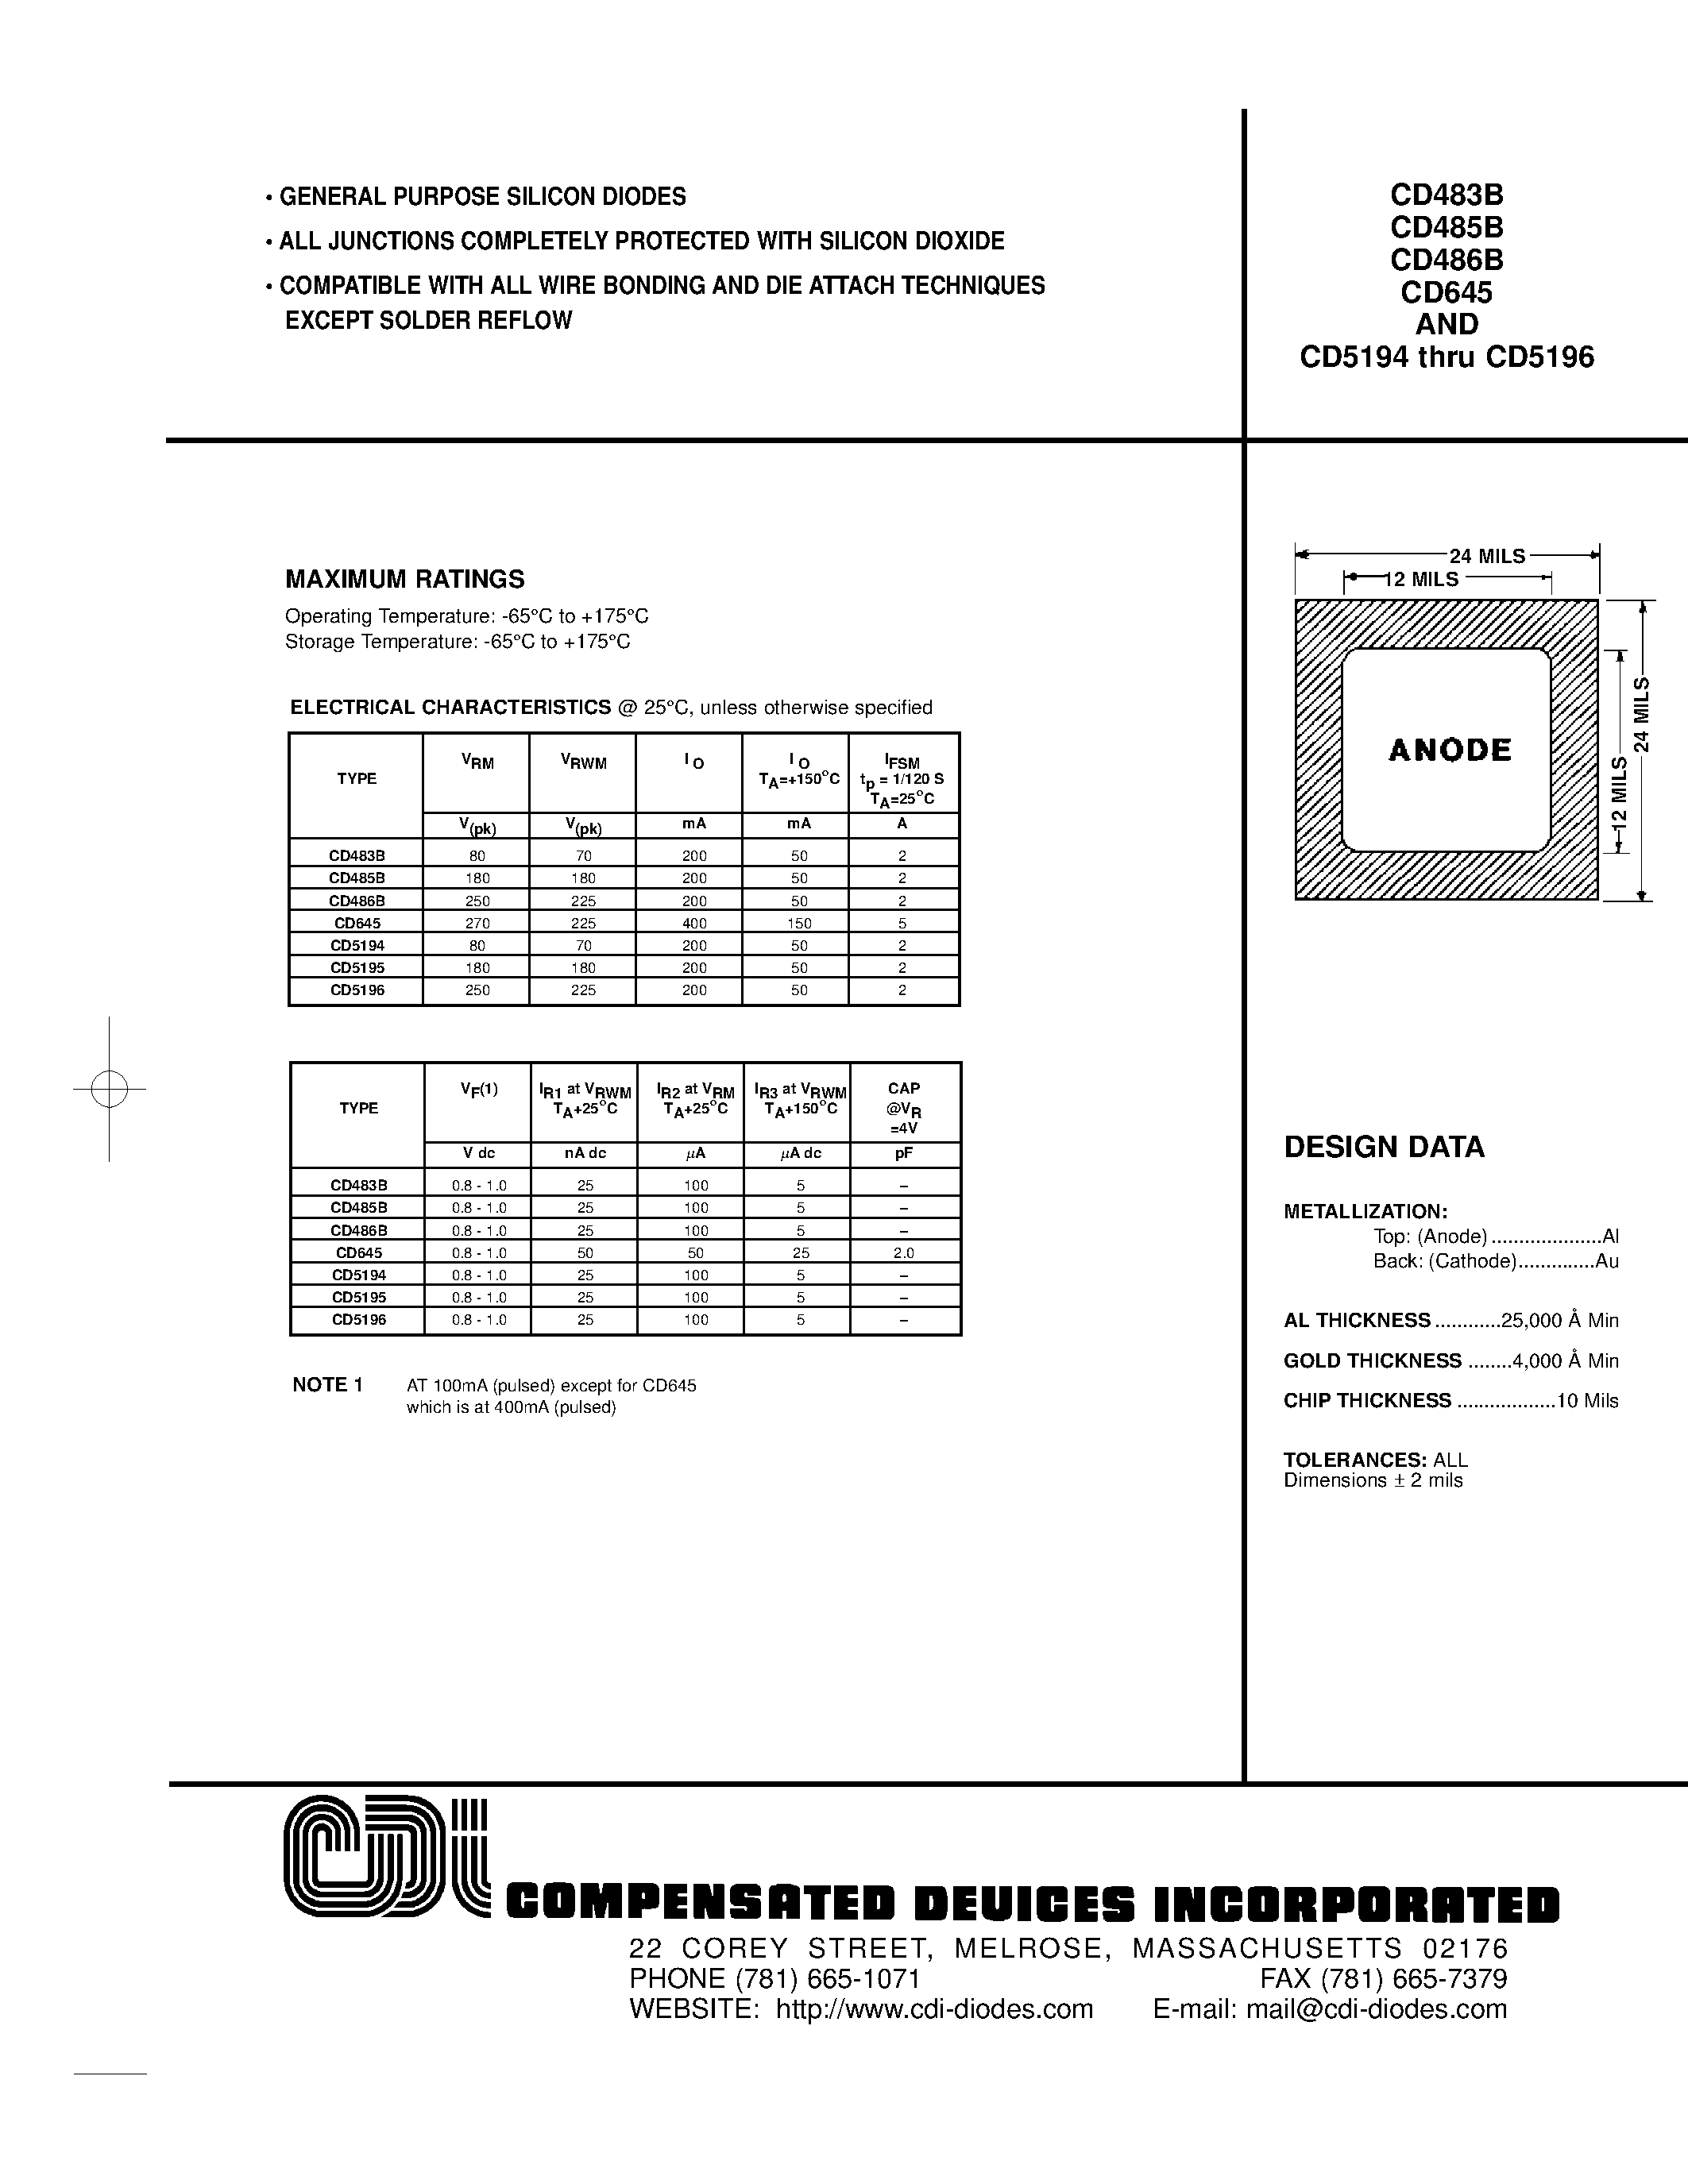 Datasheet CD485B - GENERAL PURPOSE SILICON DIODES page 1